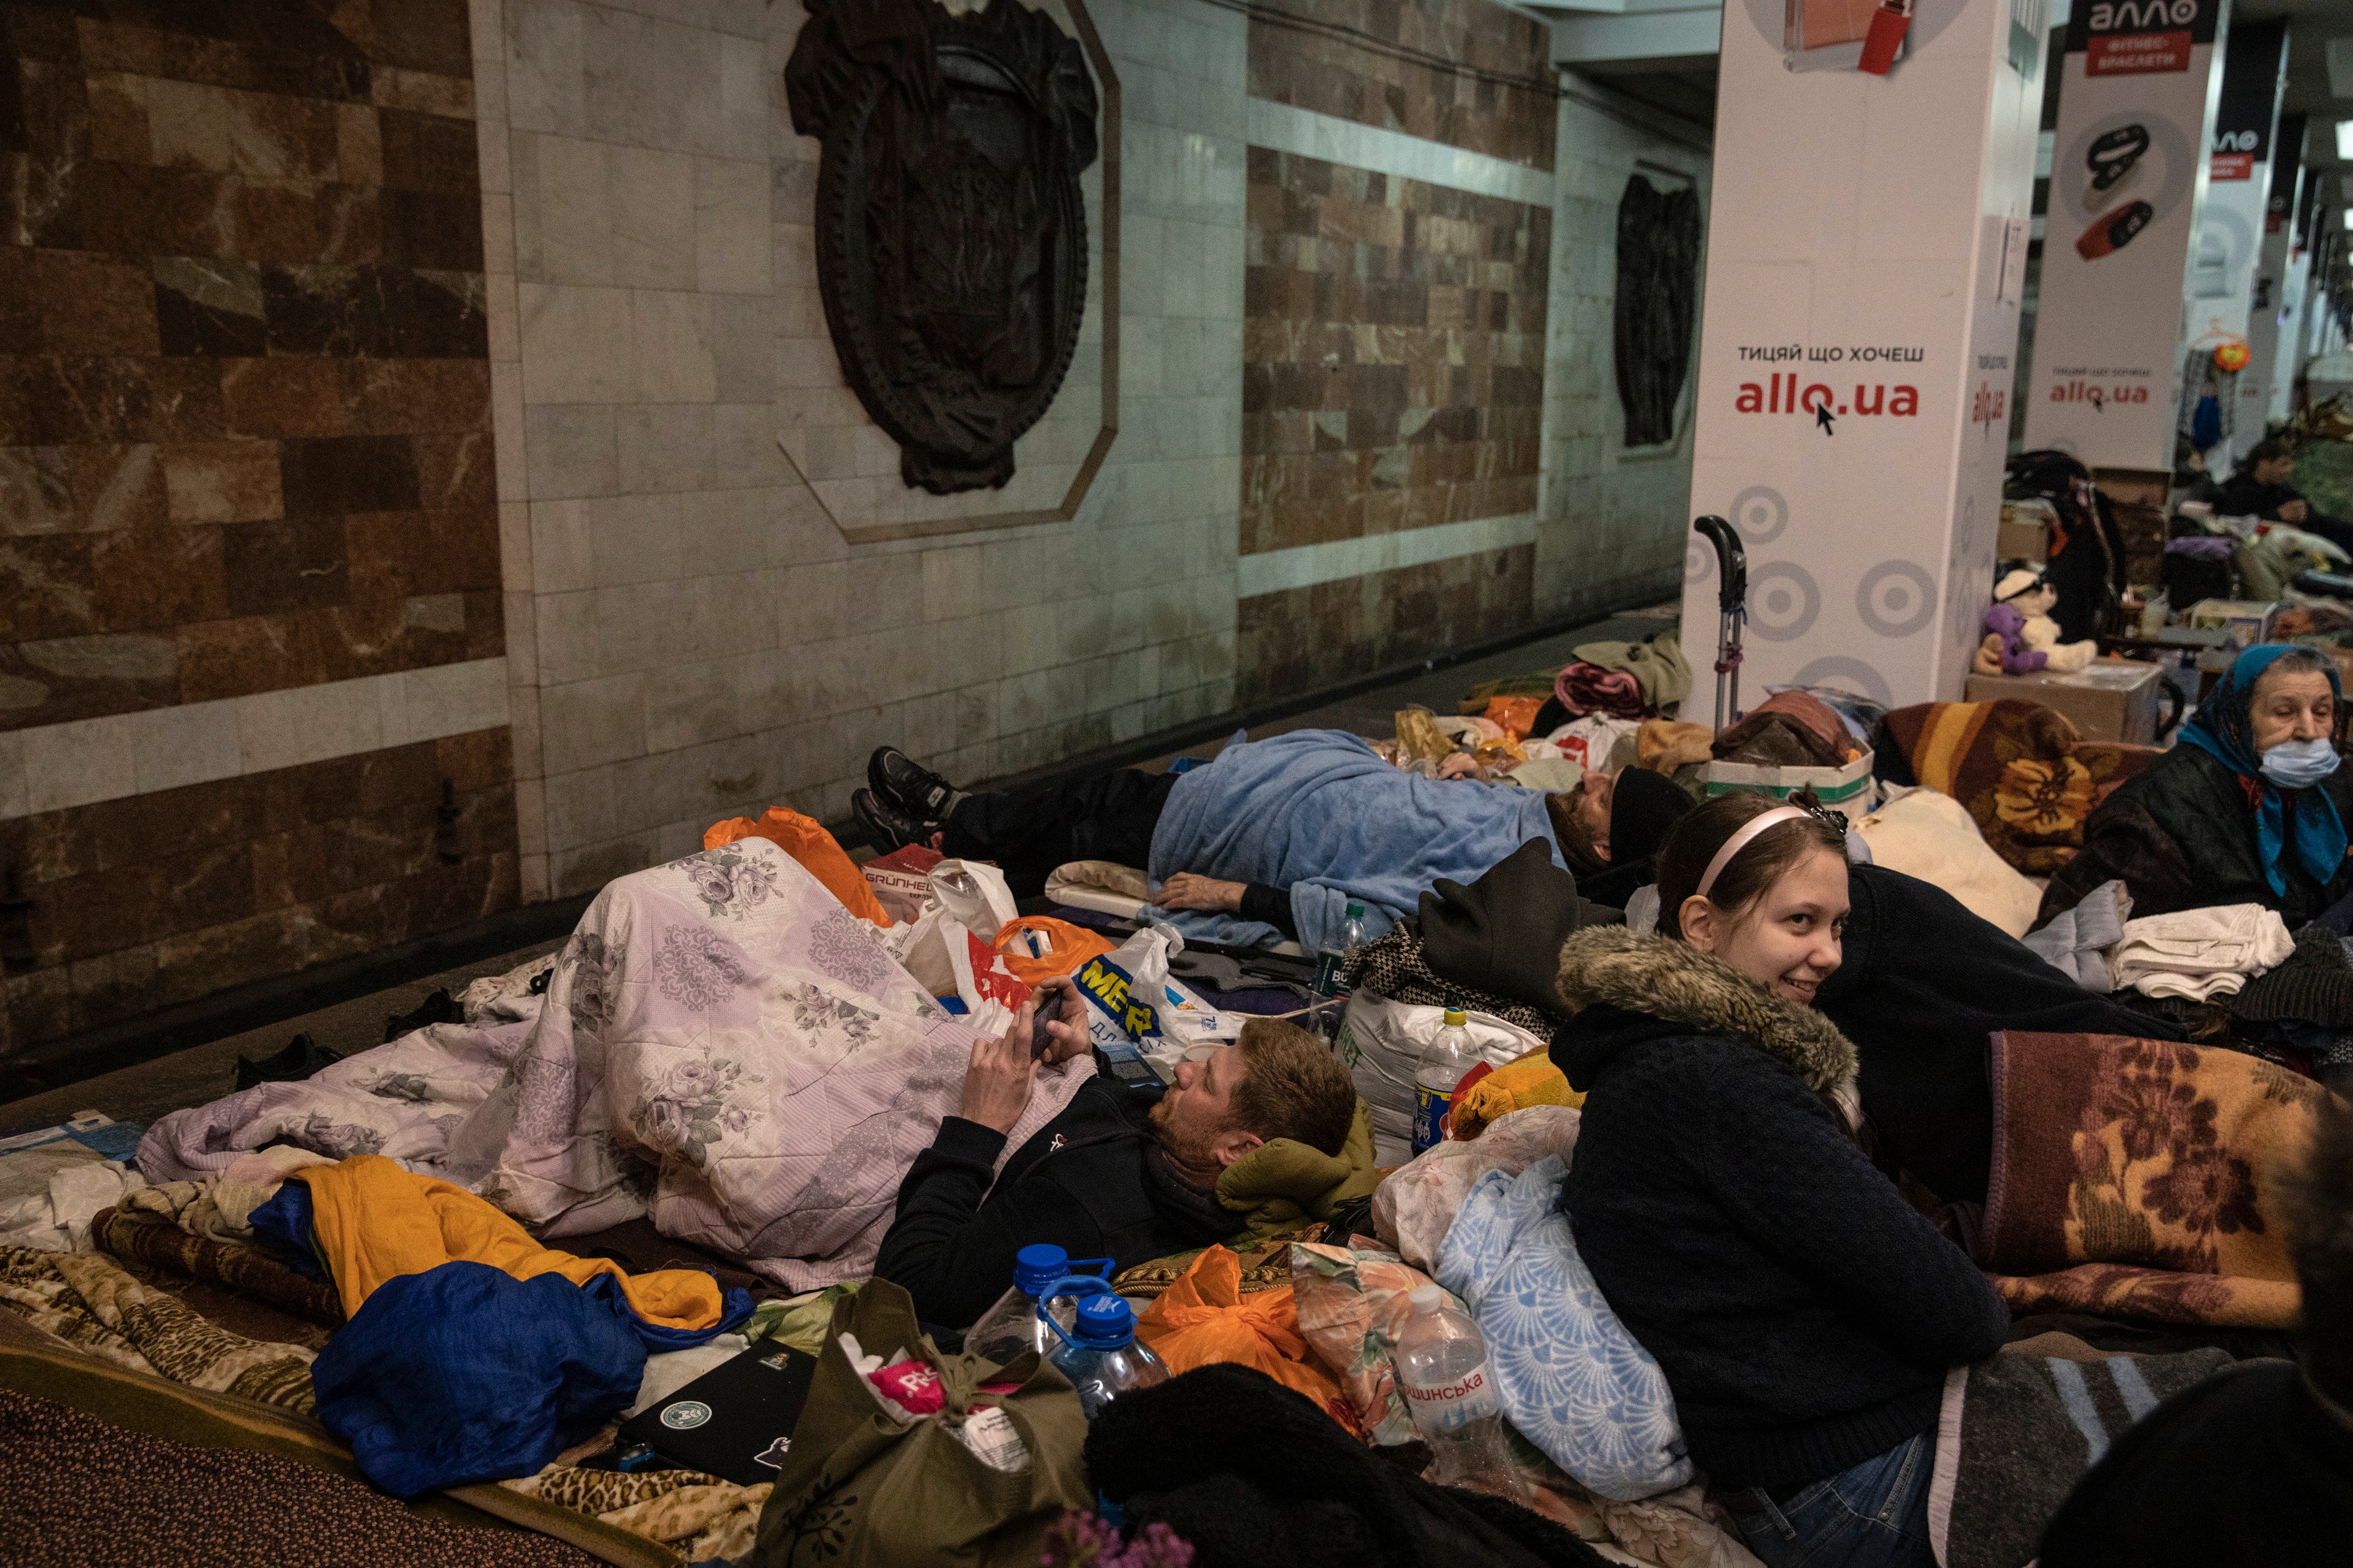 People seen resting in the metro station in Kharkiv